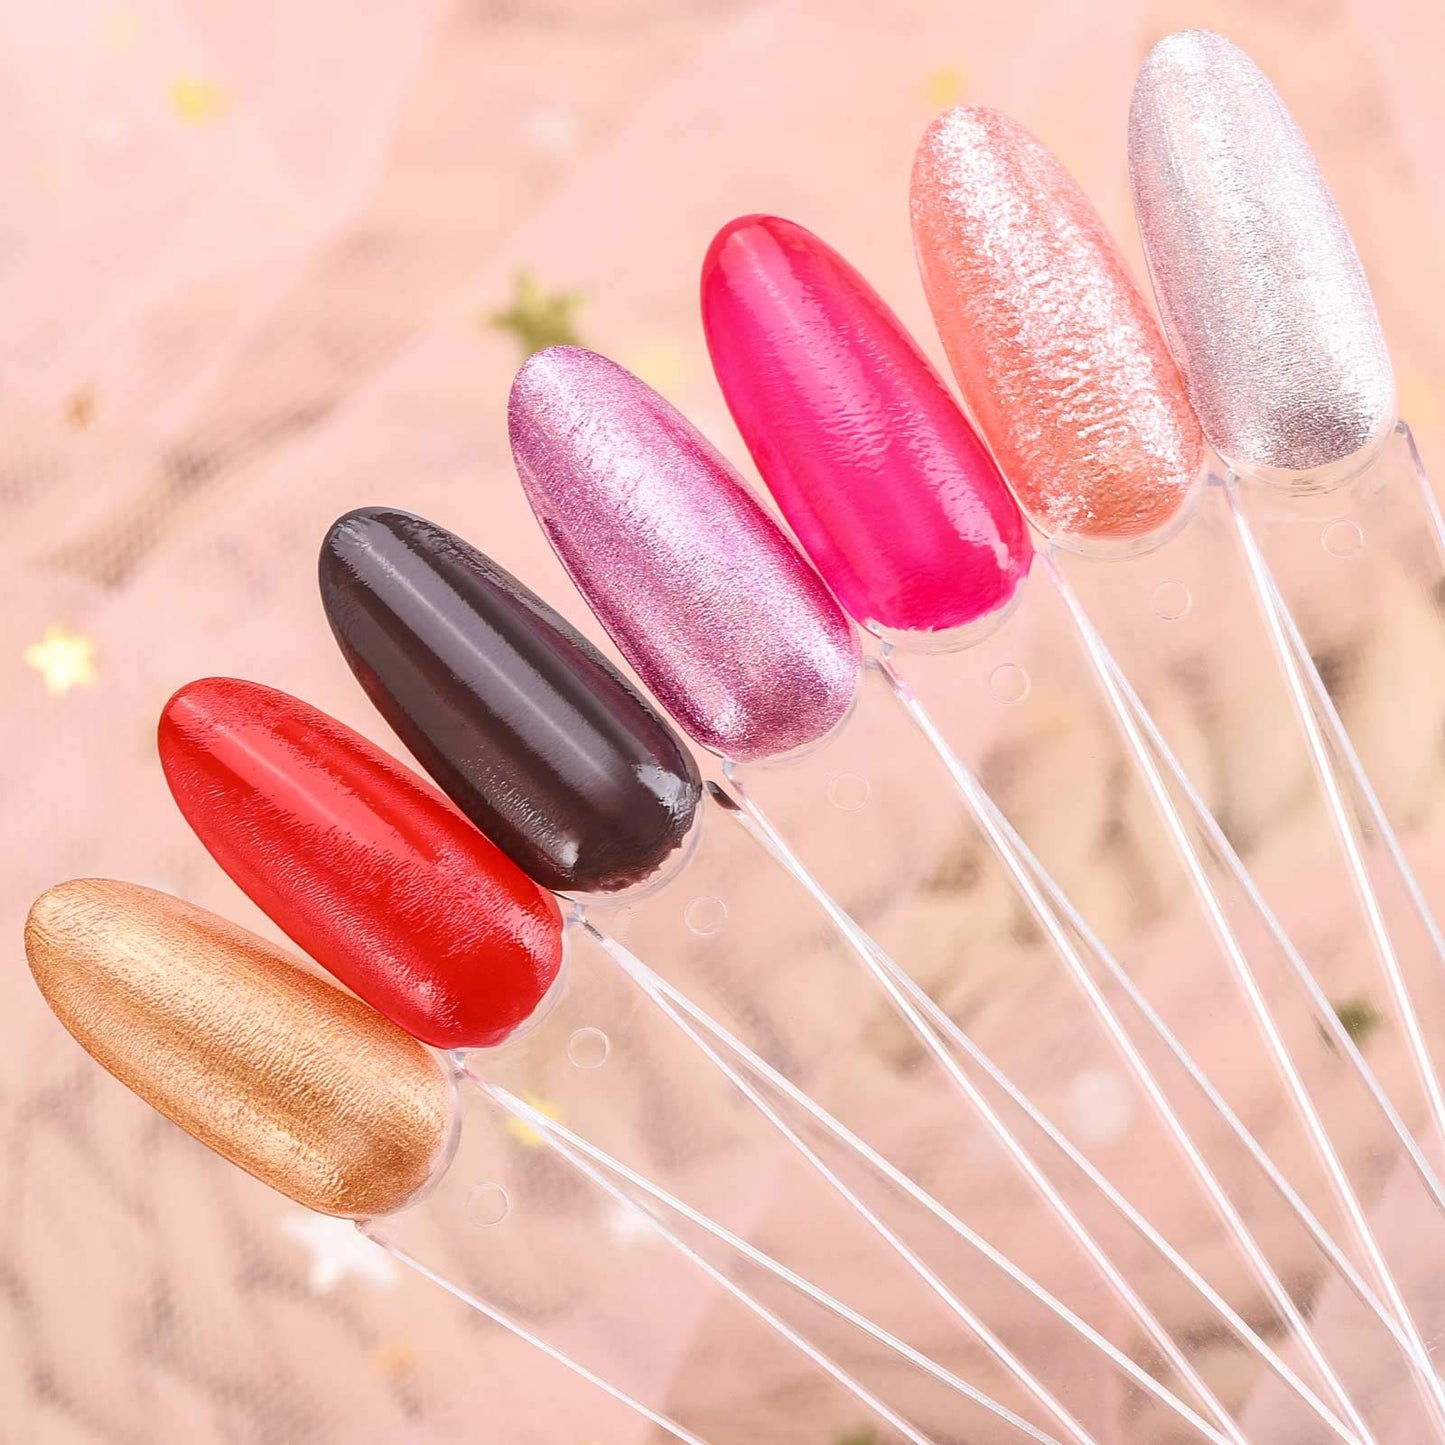 200 Pcs Oval Nail Polish Sample Sticks Fan-shaped Finger Nail Color Display Swatches with Metal Split Ring, Clear